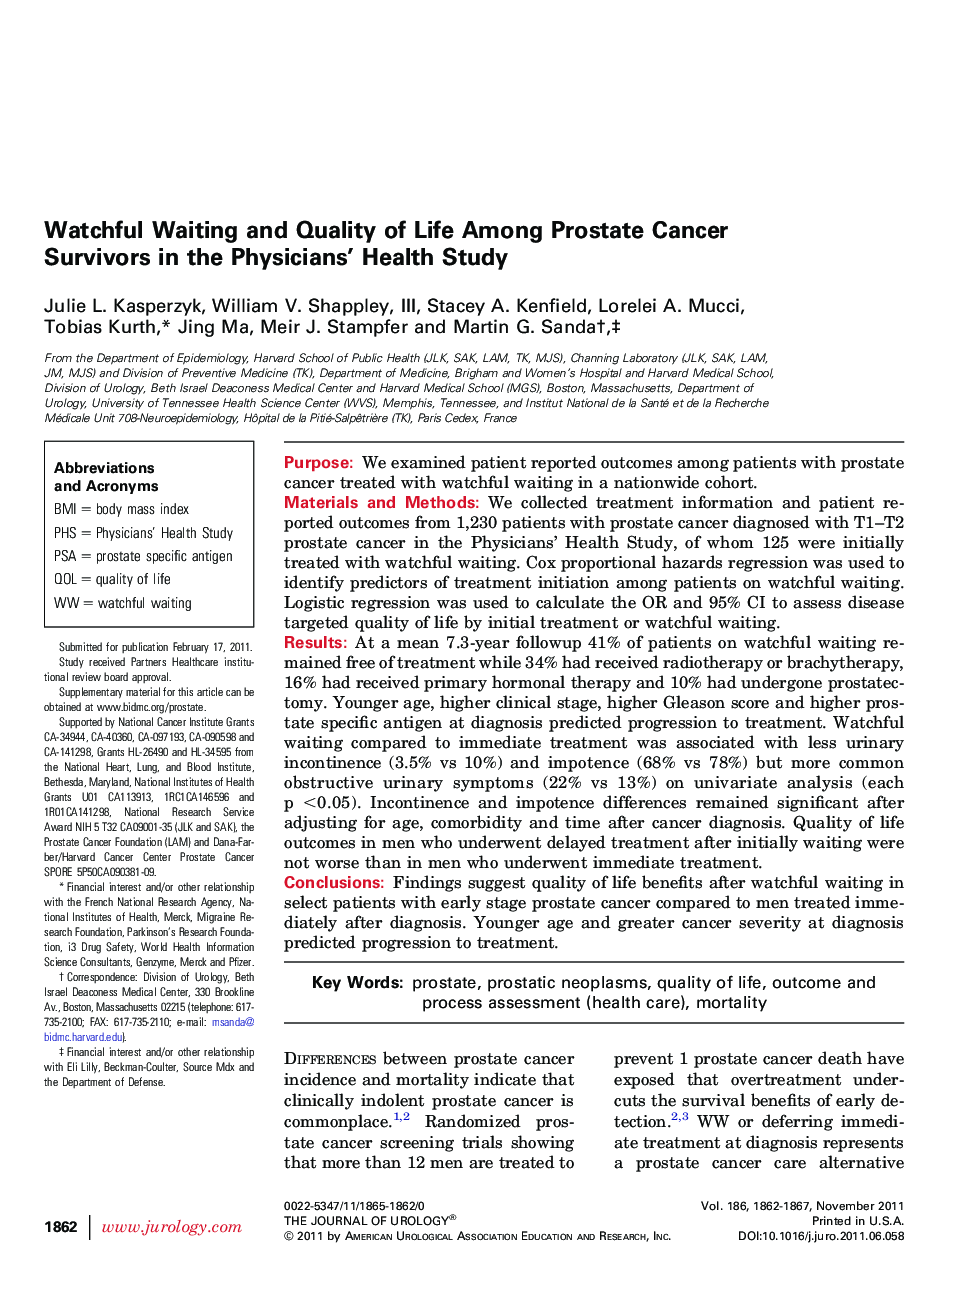 Watchful Waiting and Quality of Life Among Prostate Cancer Survivors in the Physicians' Health Study 